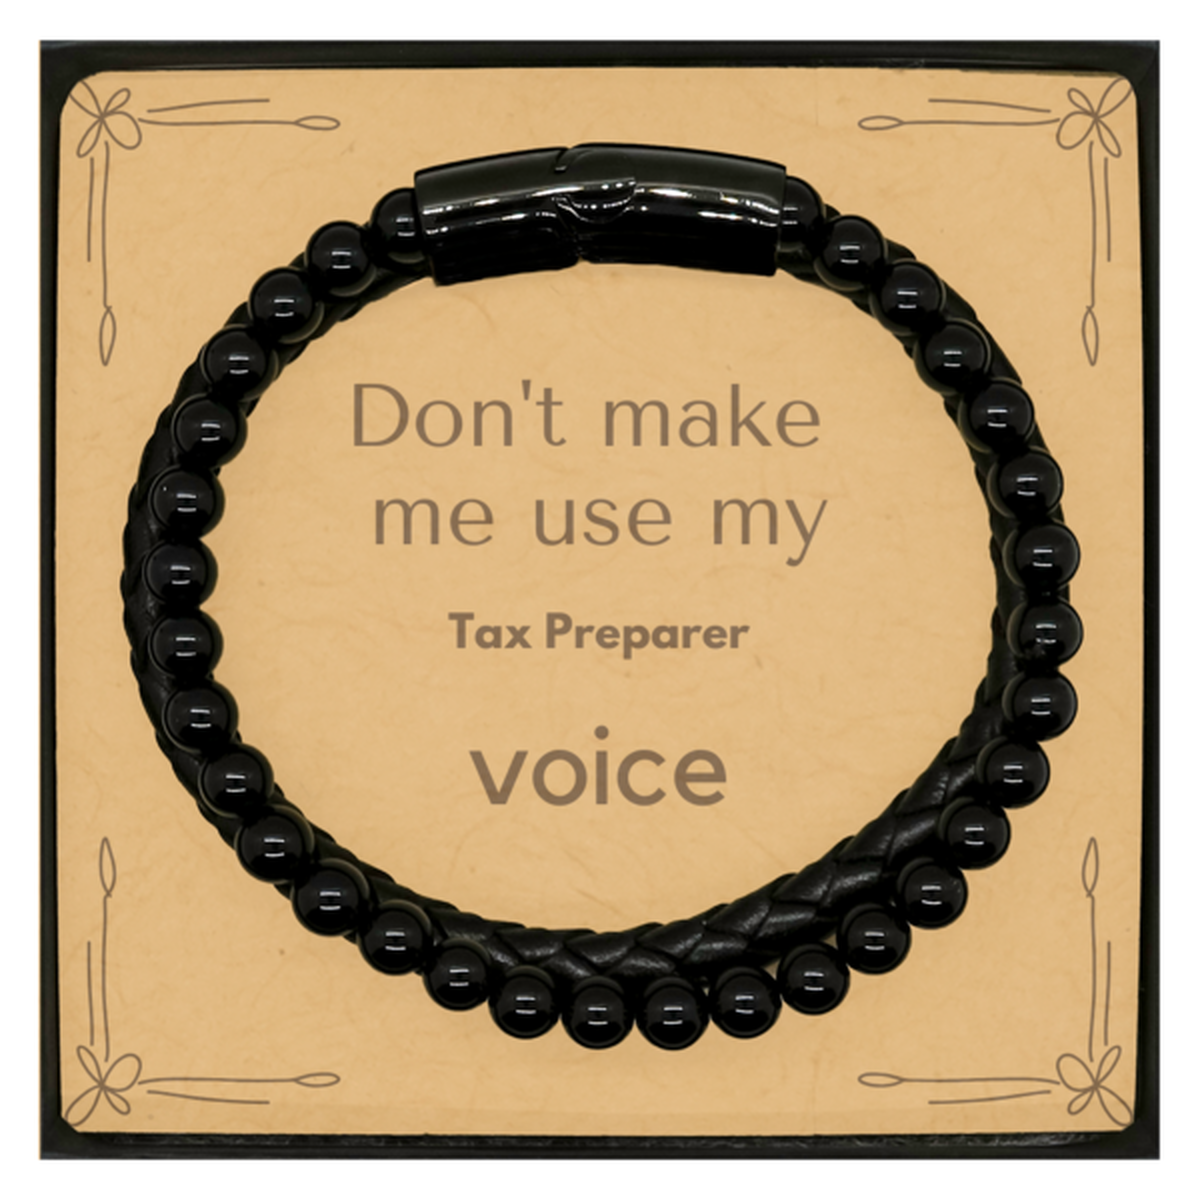 Don't make me use my Tax Preparer voice, Sarcasm Tax Preparer Card Gifts, Christmas Tax Preparer Stone Leather Bracelets Birthday Unique Gifts For Tax Preparer Coworkers, Men, Women, Colleague, Friends